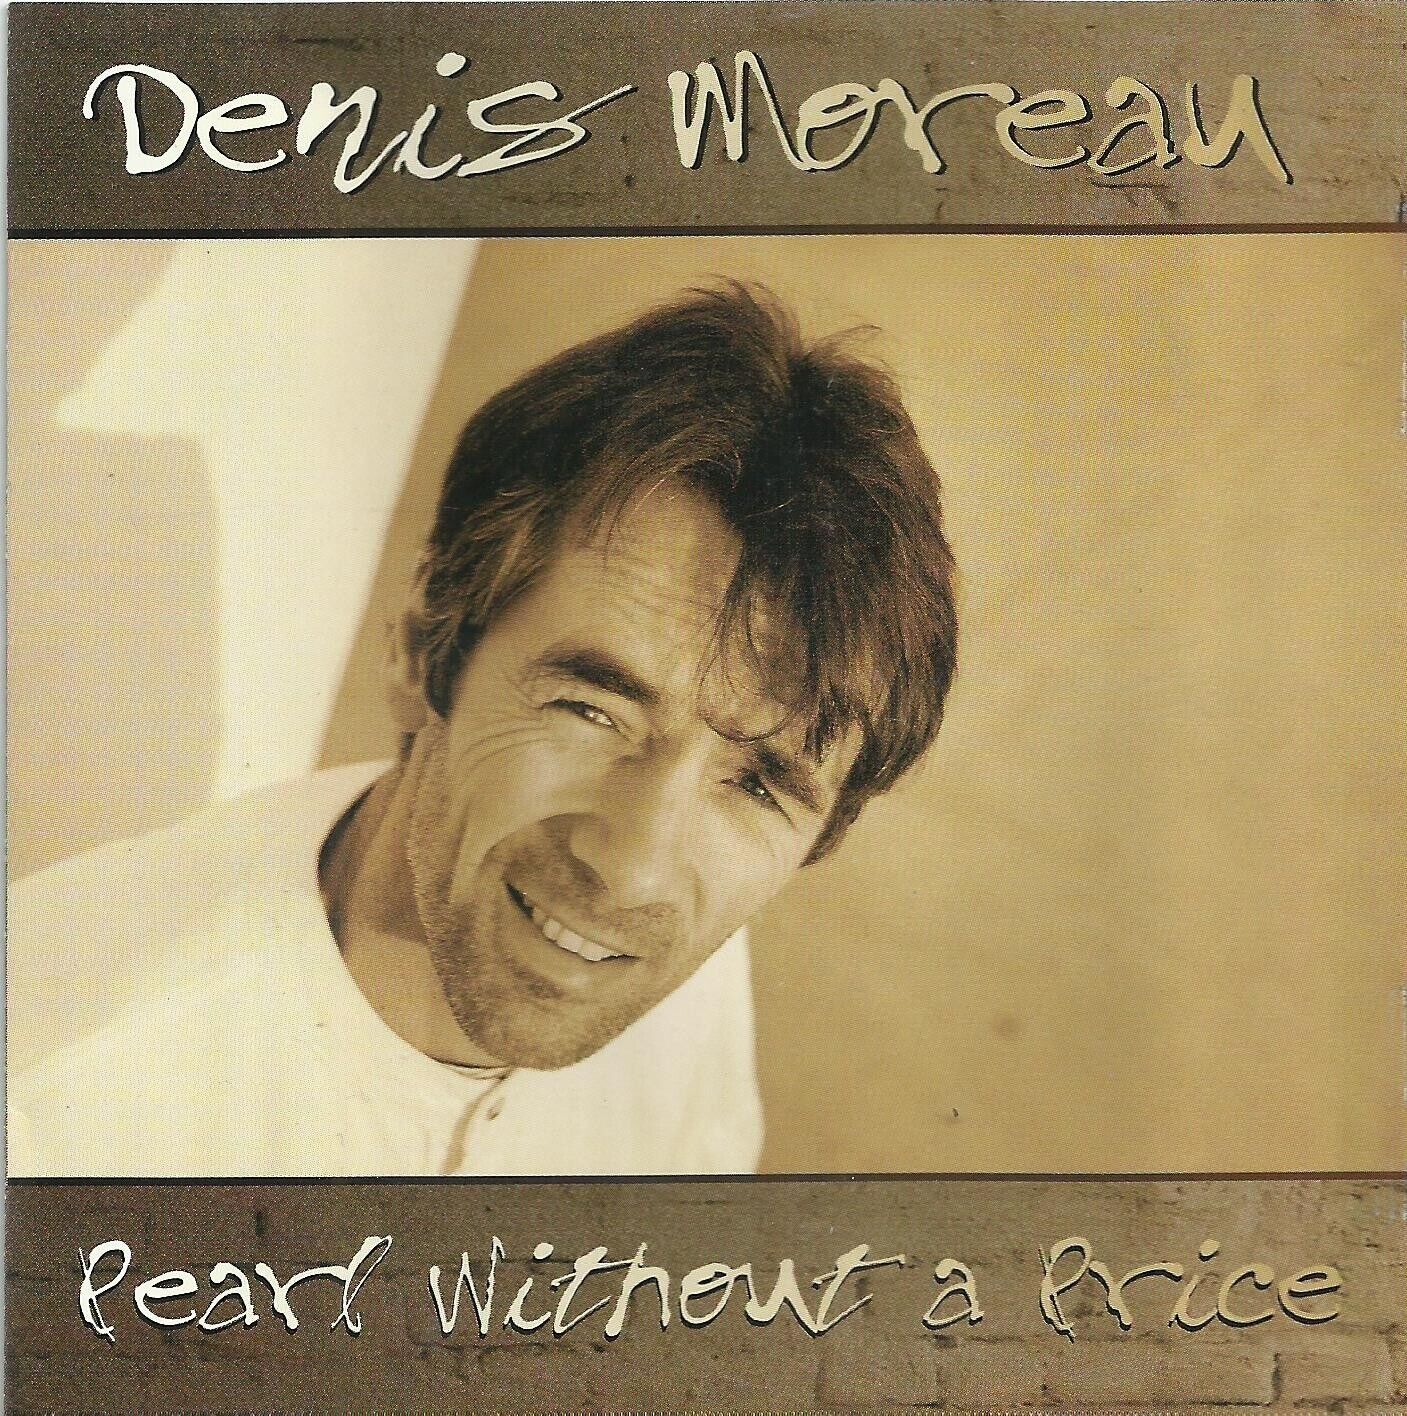 Denis Moreau Pearl without a price cd